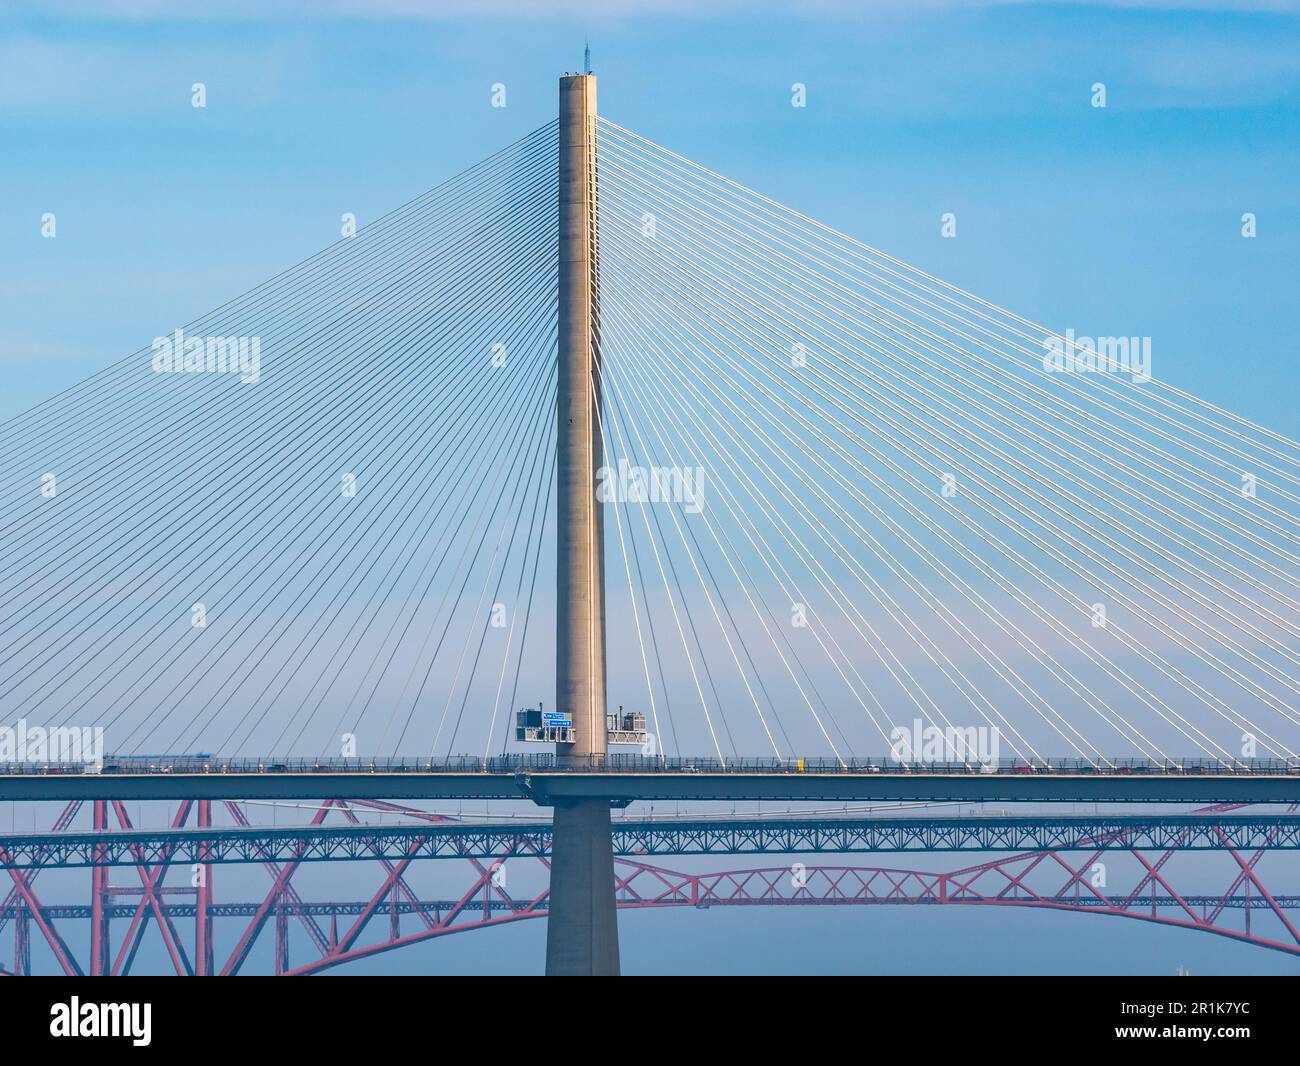 View of cables ,towers and deck of Queensferry crossing road bridge, Scotland, UK Stock Photo